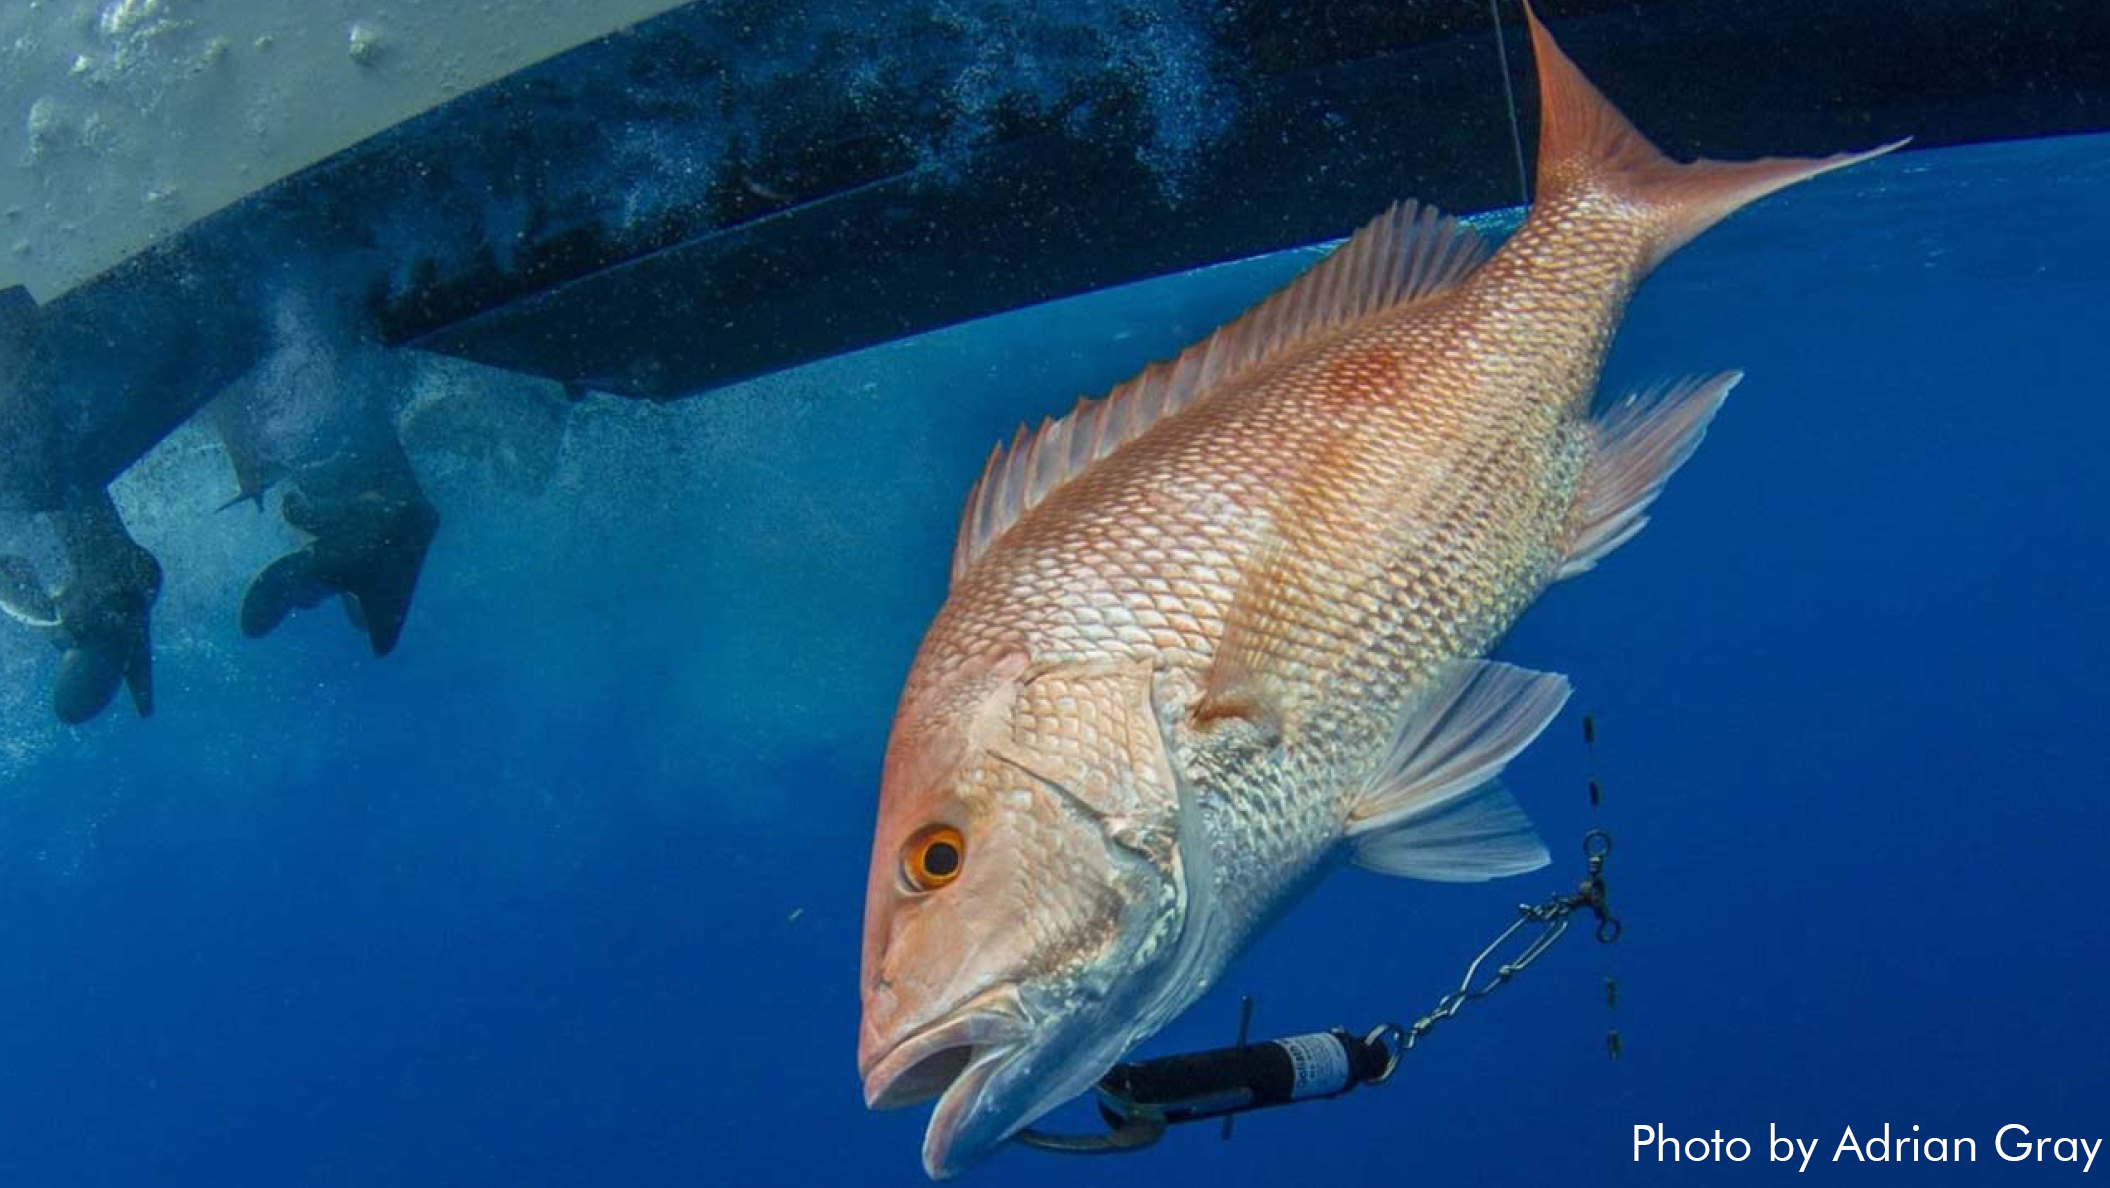 Snapper with descending device